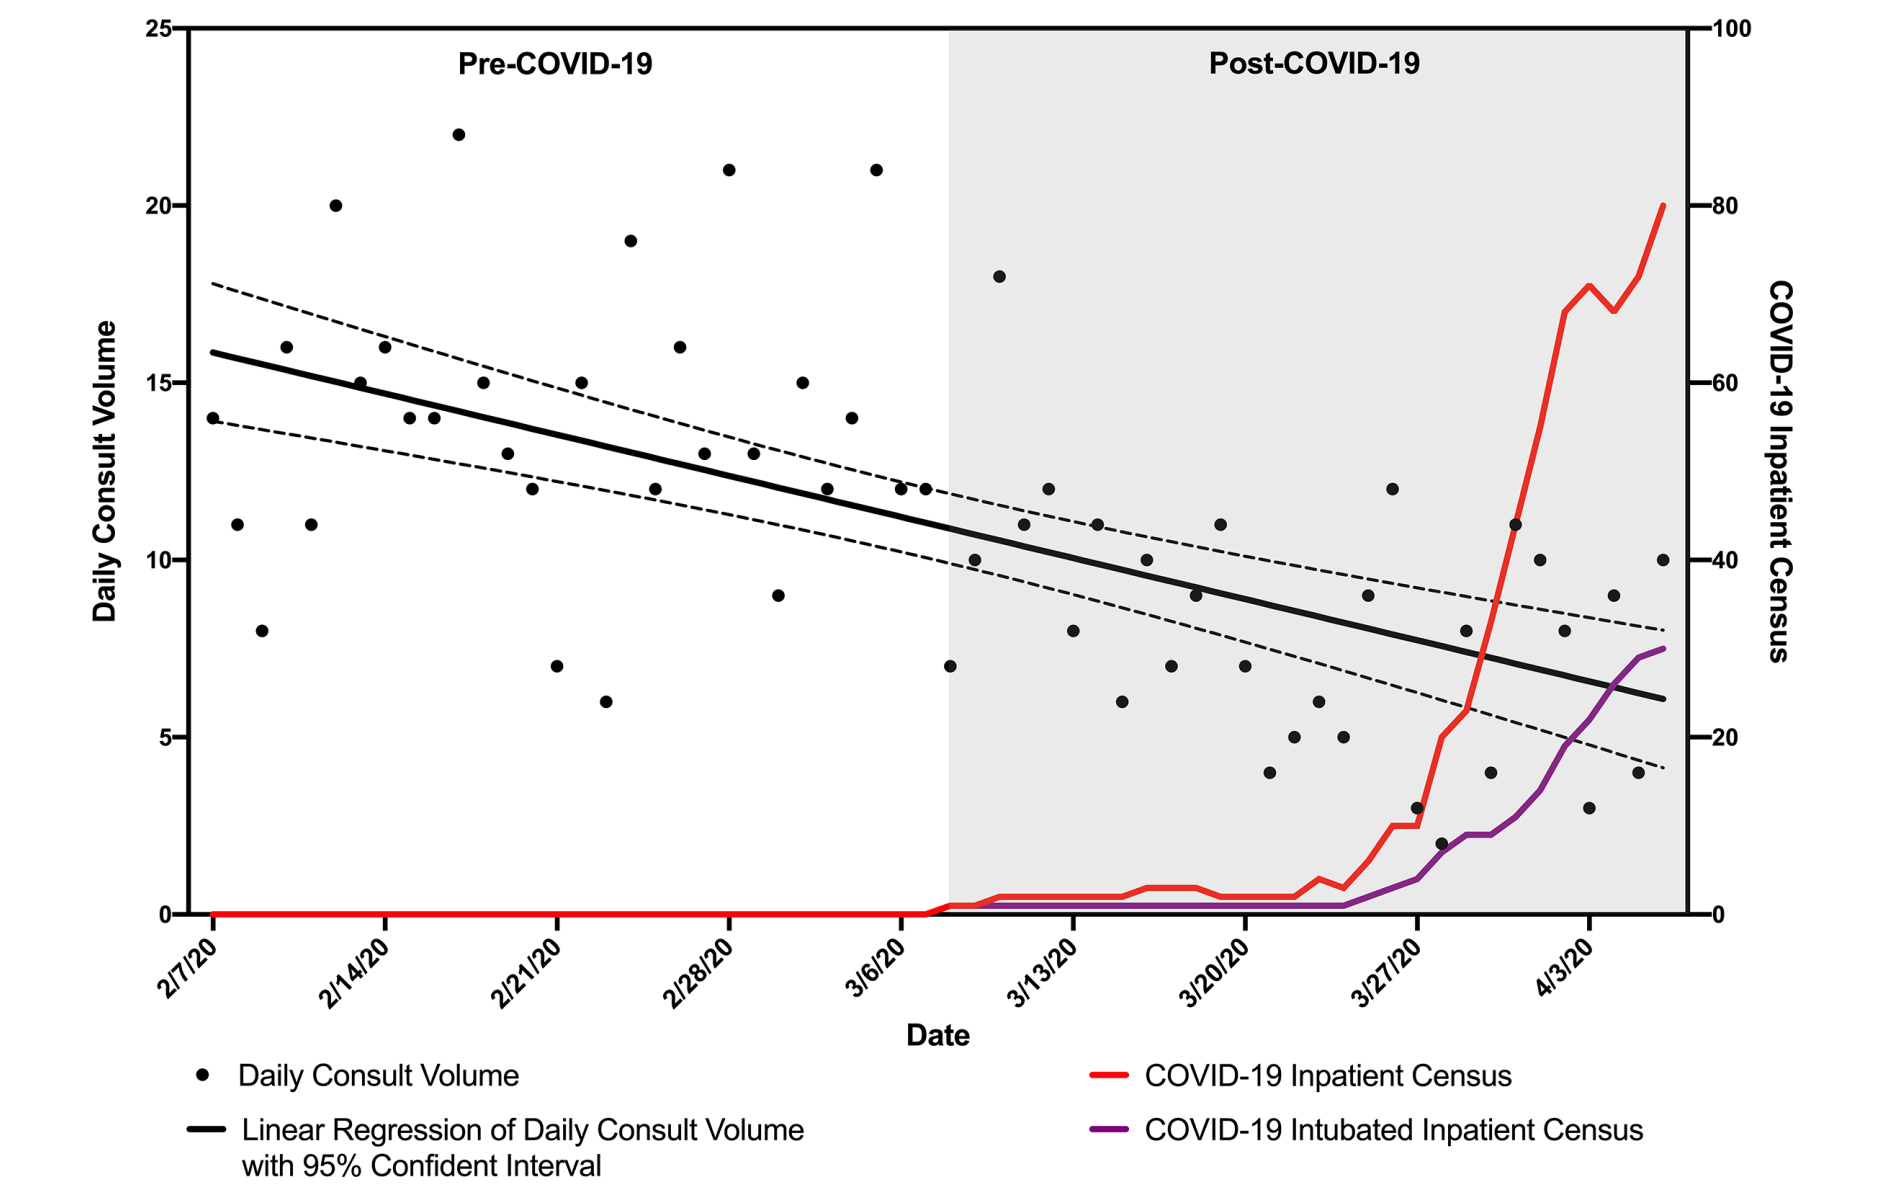 Figure 1. Consult volume was significantly reduced in the post-COVID-19 period